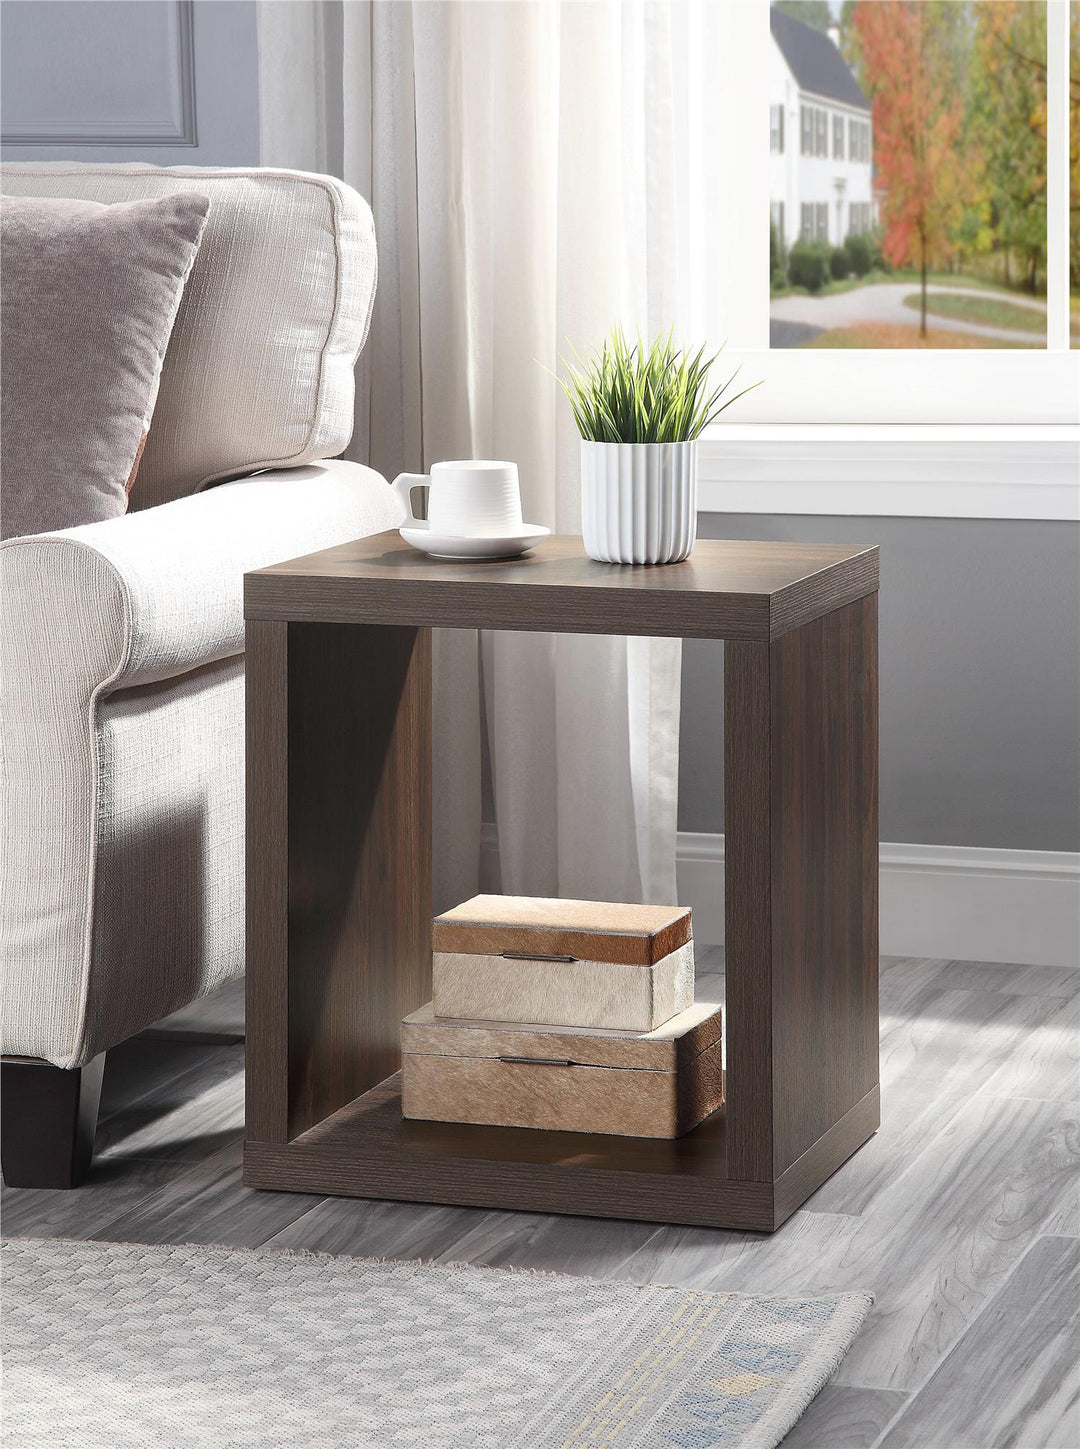 Modular accent table with open storage - Walnut